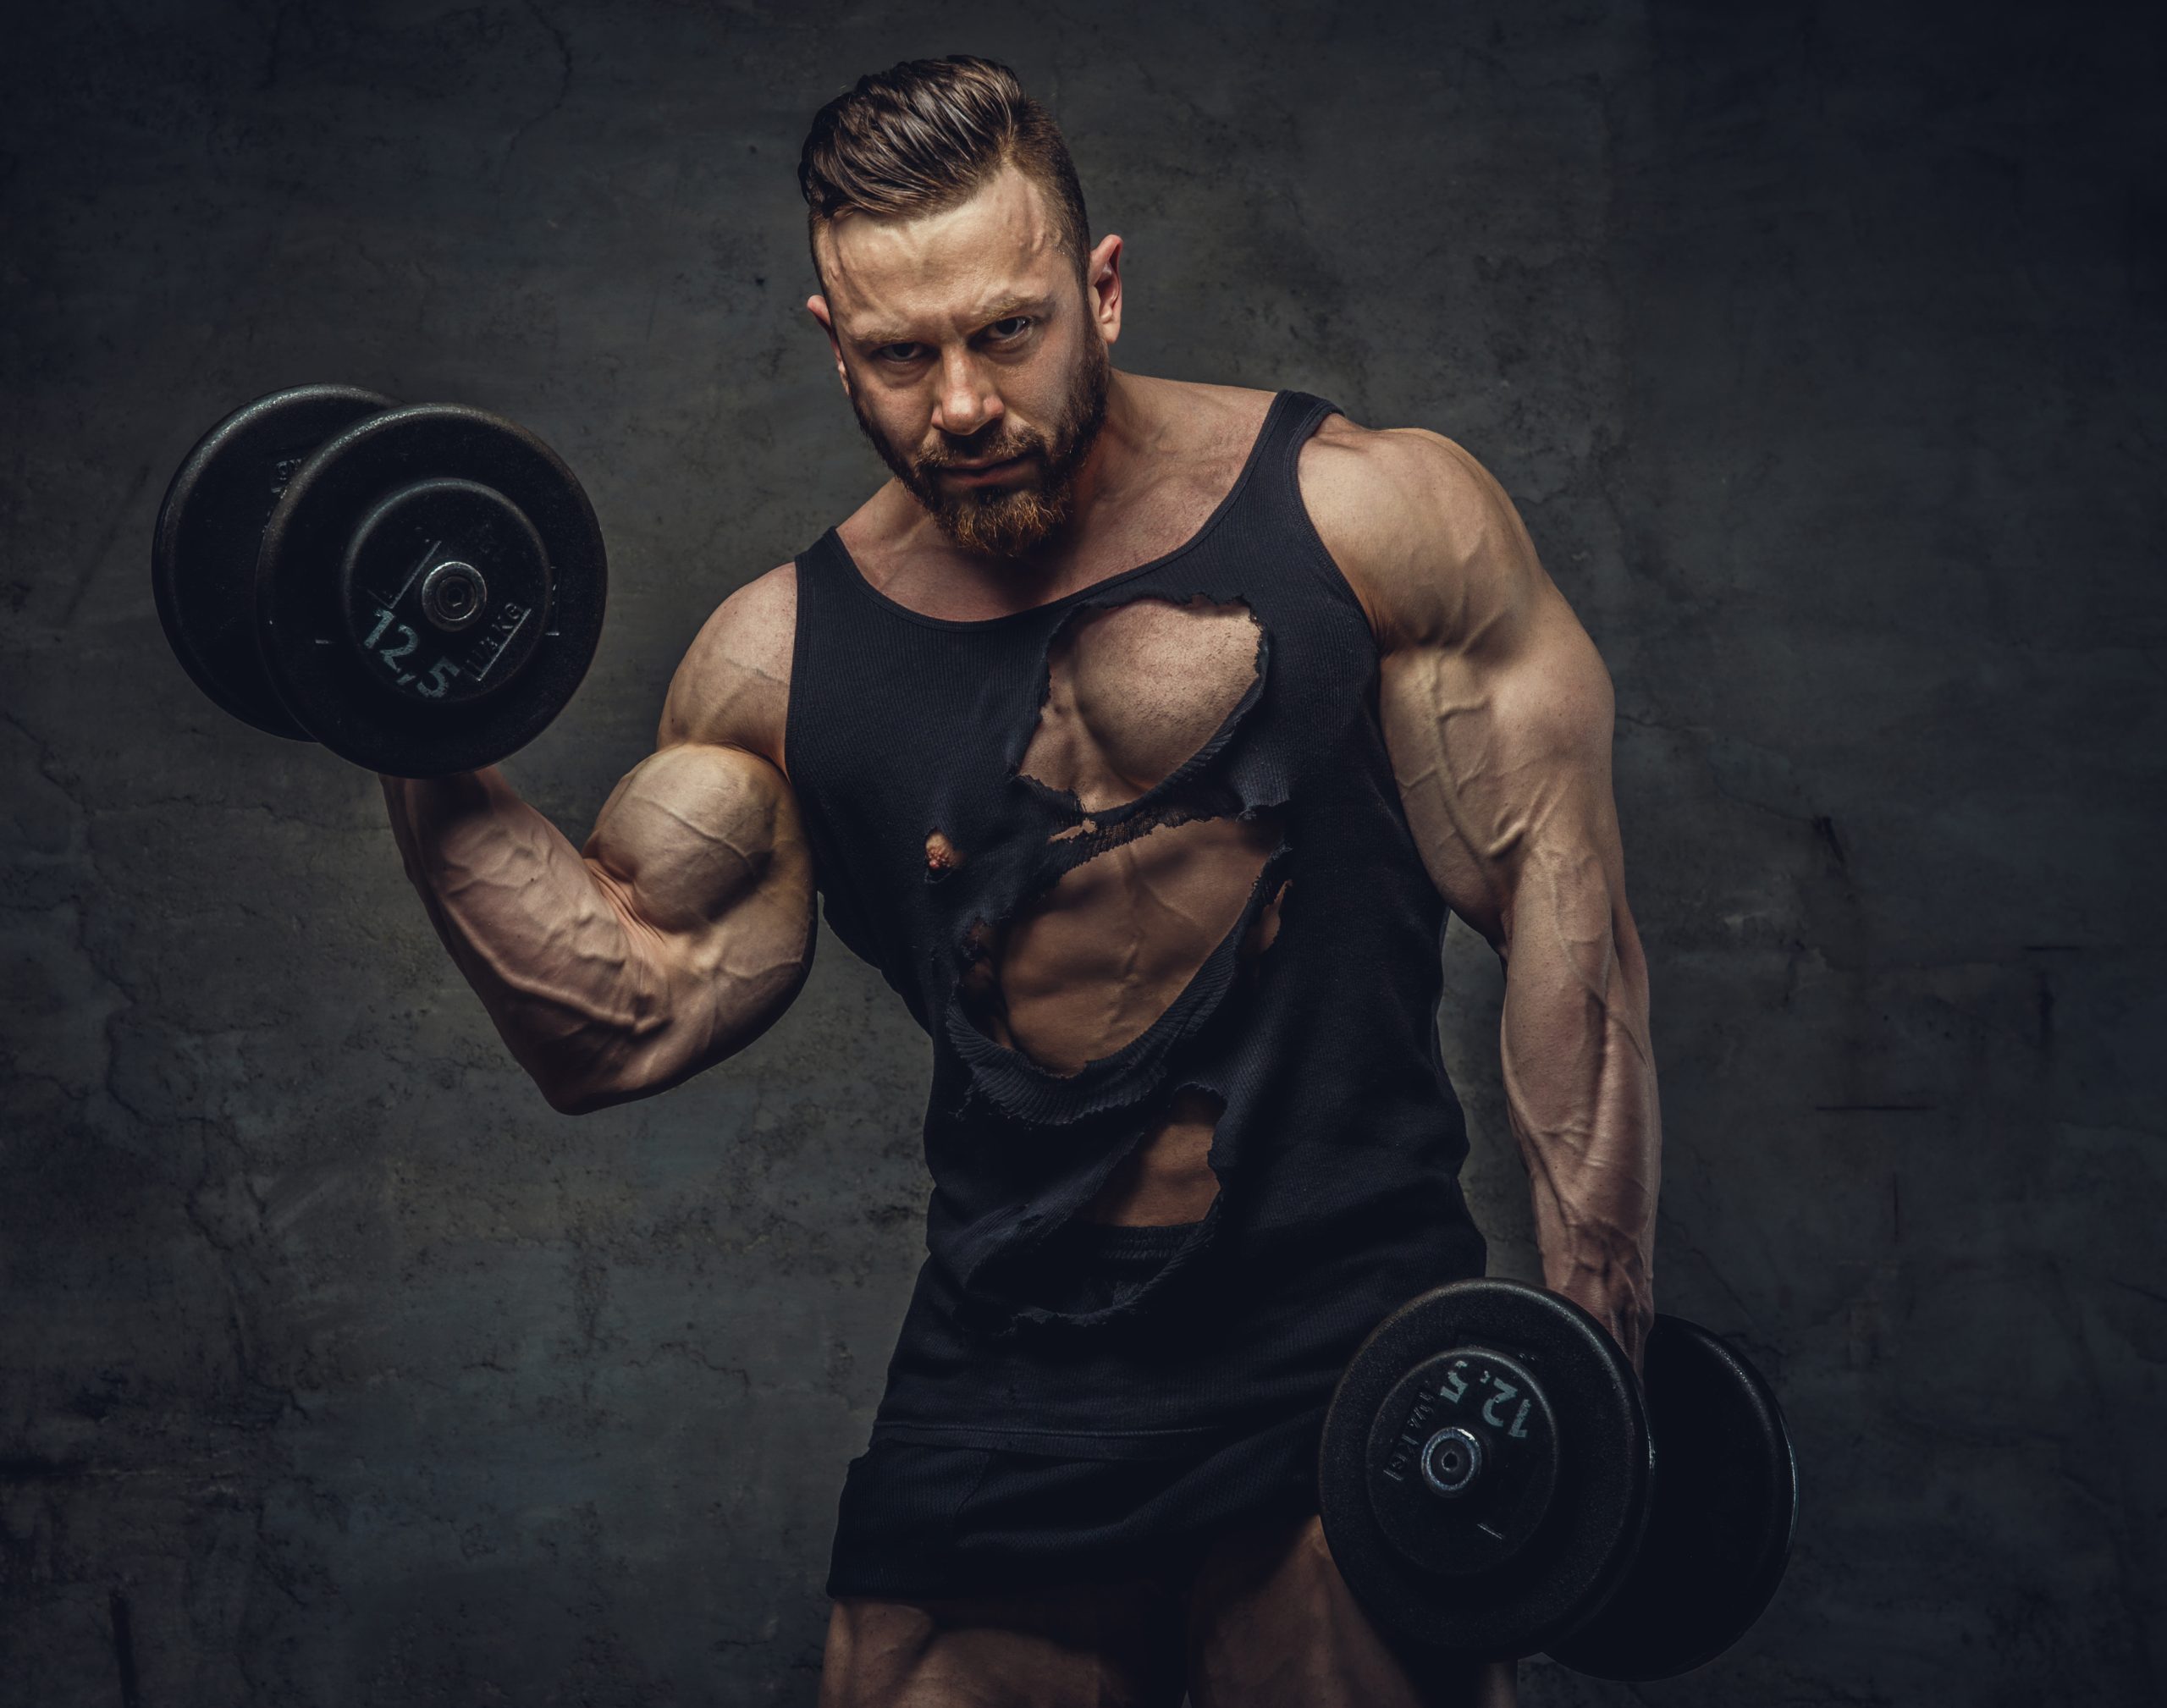 Portrait of bodybuilder with dumbbells in his arms